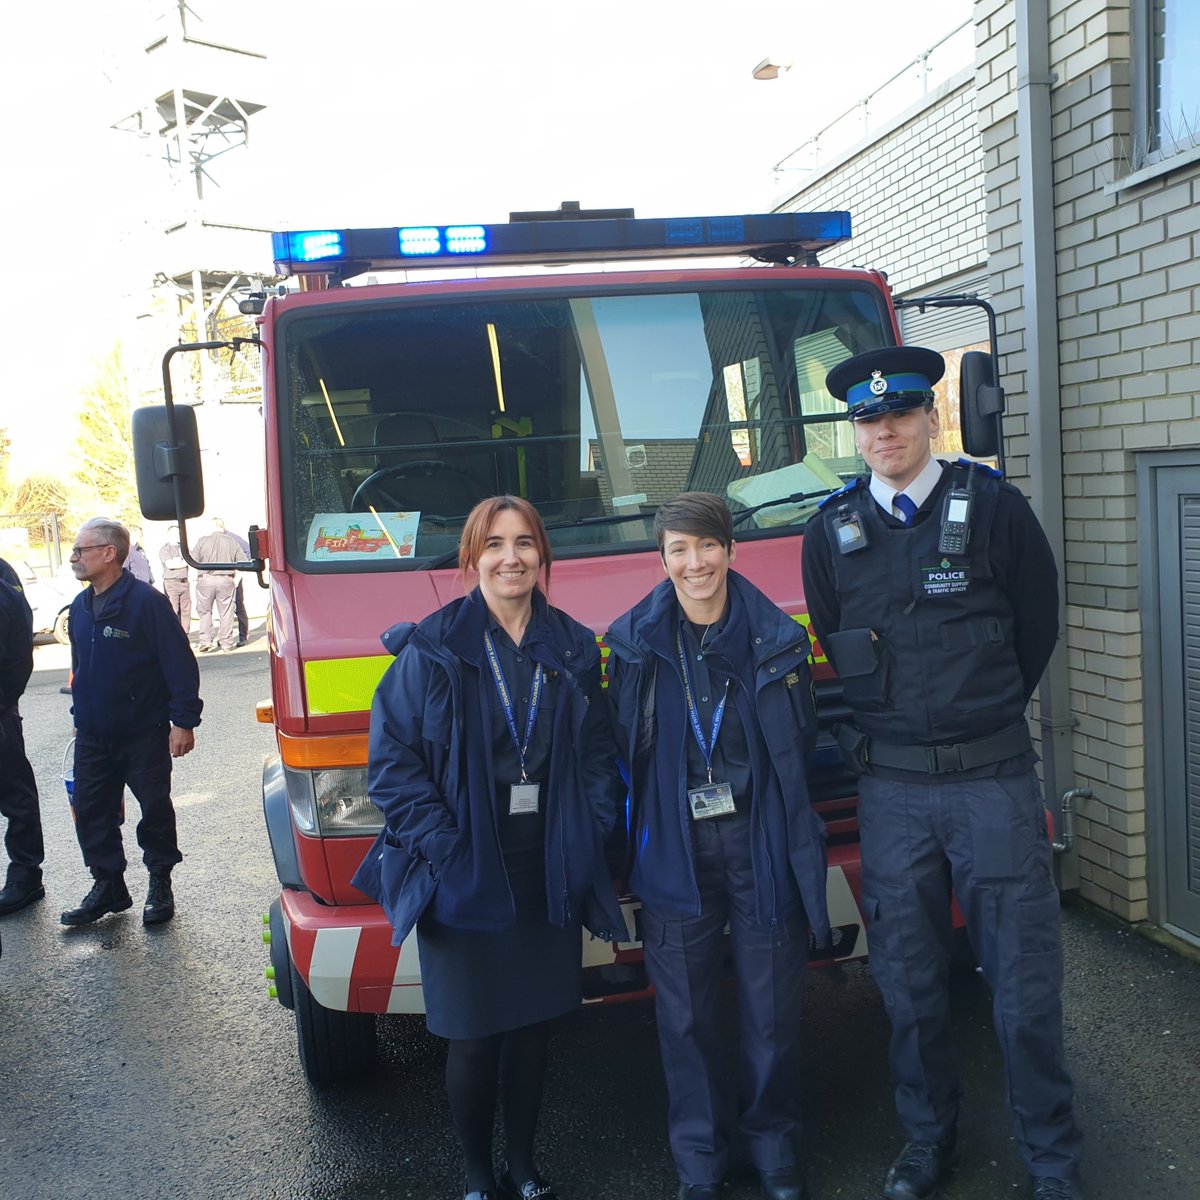 On Sunday Constable 2199 and PCSO 1790 attended the Netherton Fire Station for a local event which involved interacting with members of the community and fellow emergency services from Northwest Ambulance and Merseyside Fire. All parties delivered a fun and insightful day.